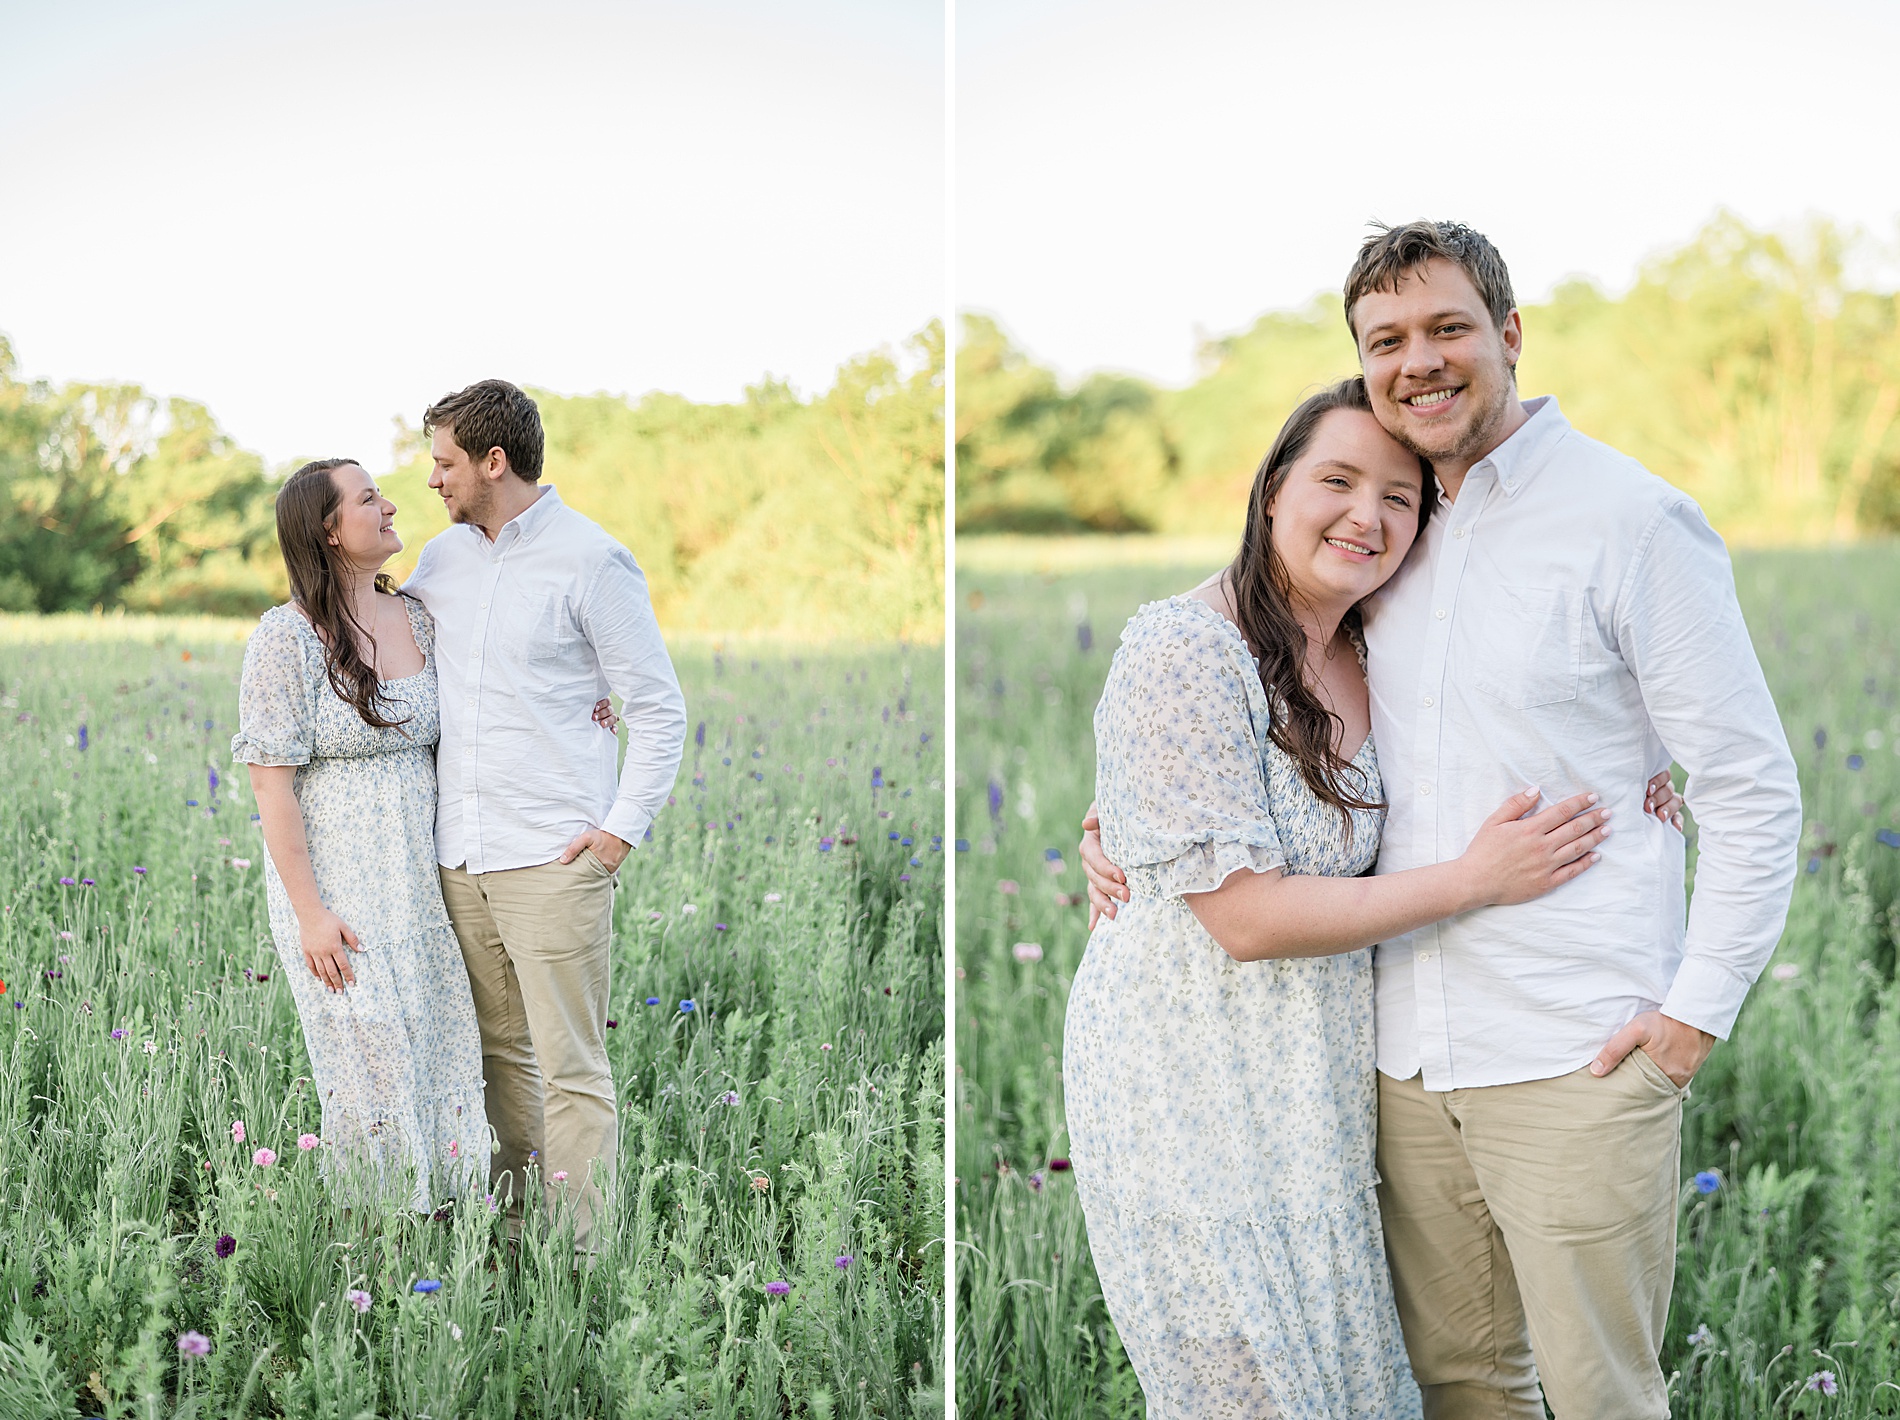 Mini Sessions vs. Full sessions | Choosing the Right Photography Experience for Your Family by Lindsey Dutton Photography, a Dallas family photographer